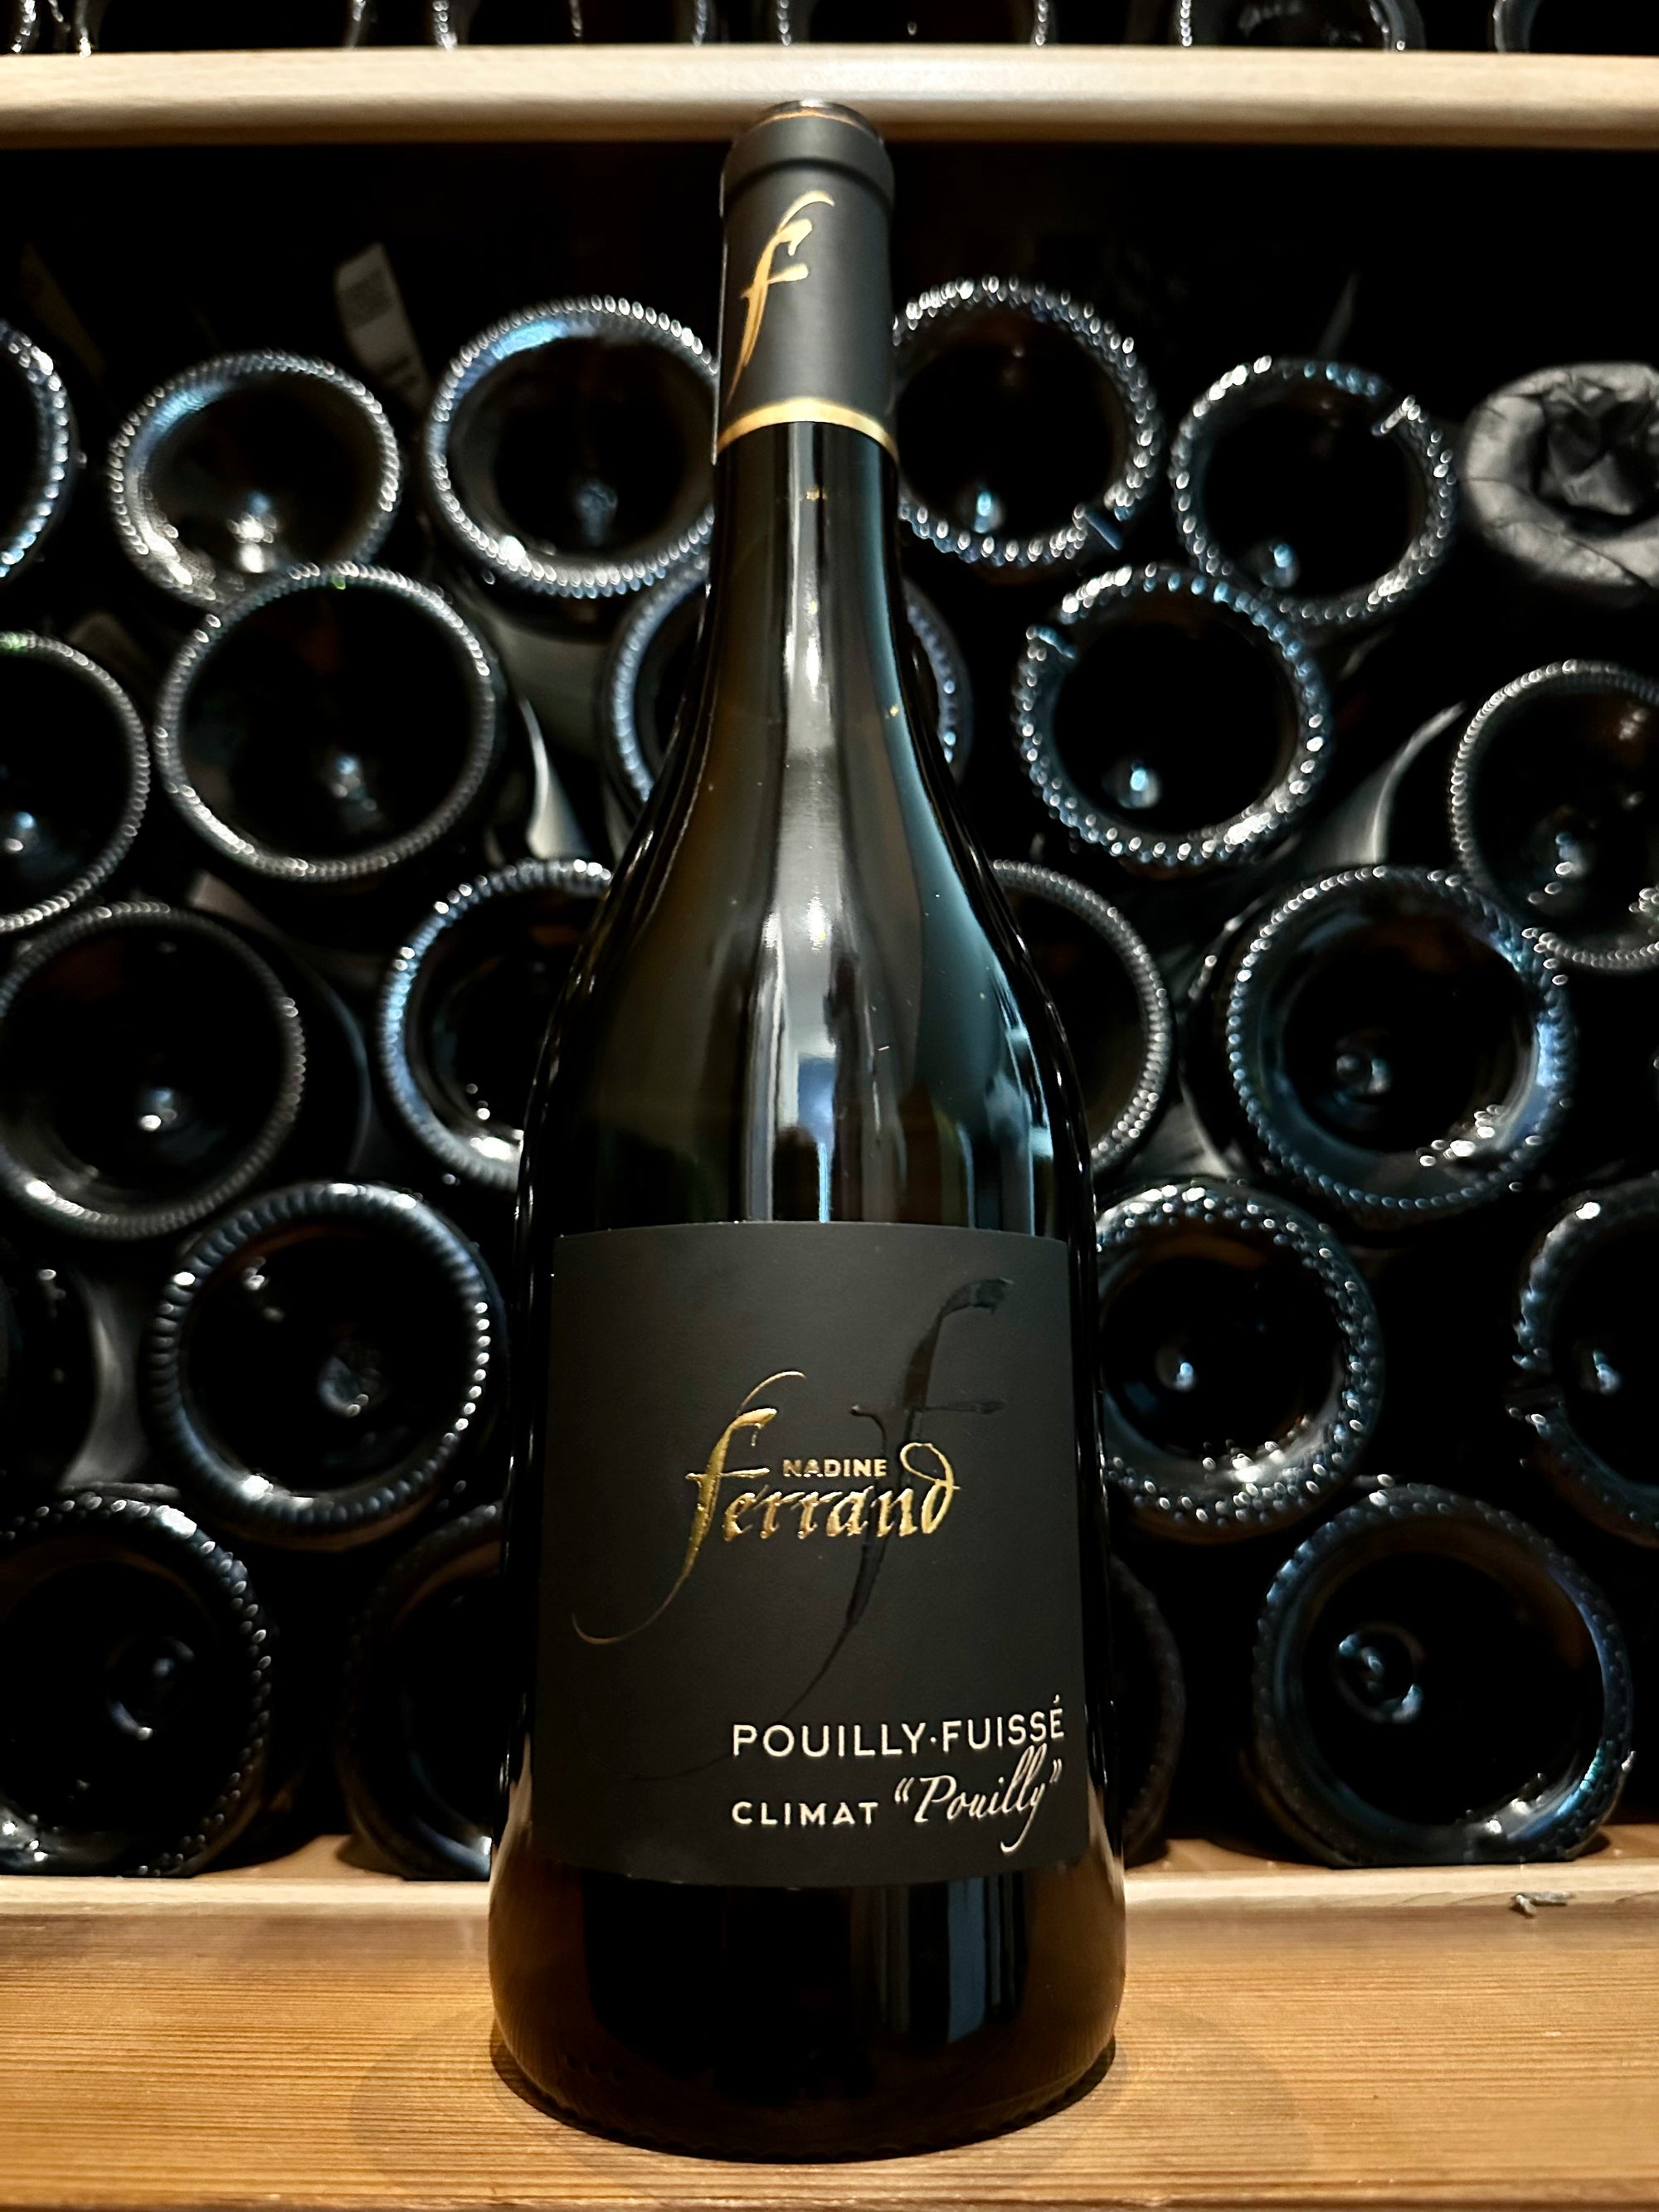 Domaine Nadine Ferrand Pouilly-Fuisse Climat Pouilly 2018